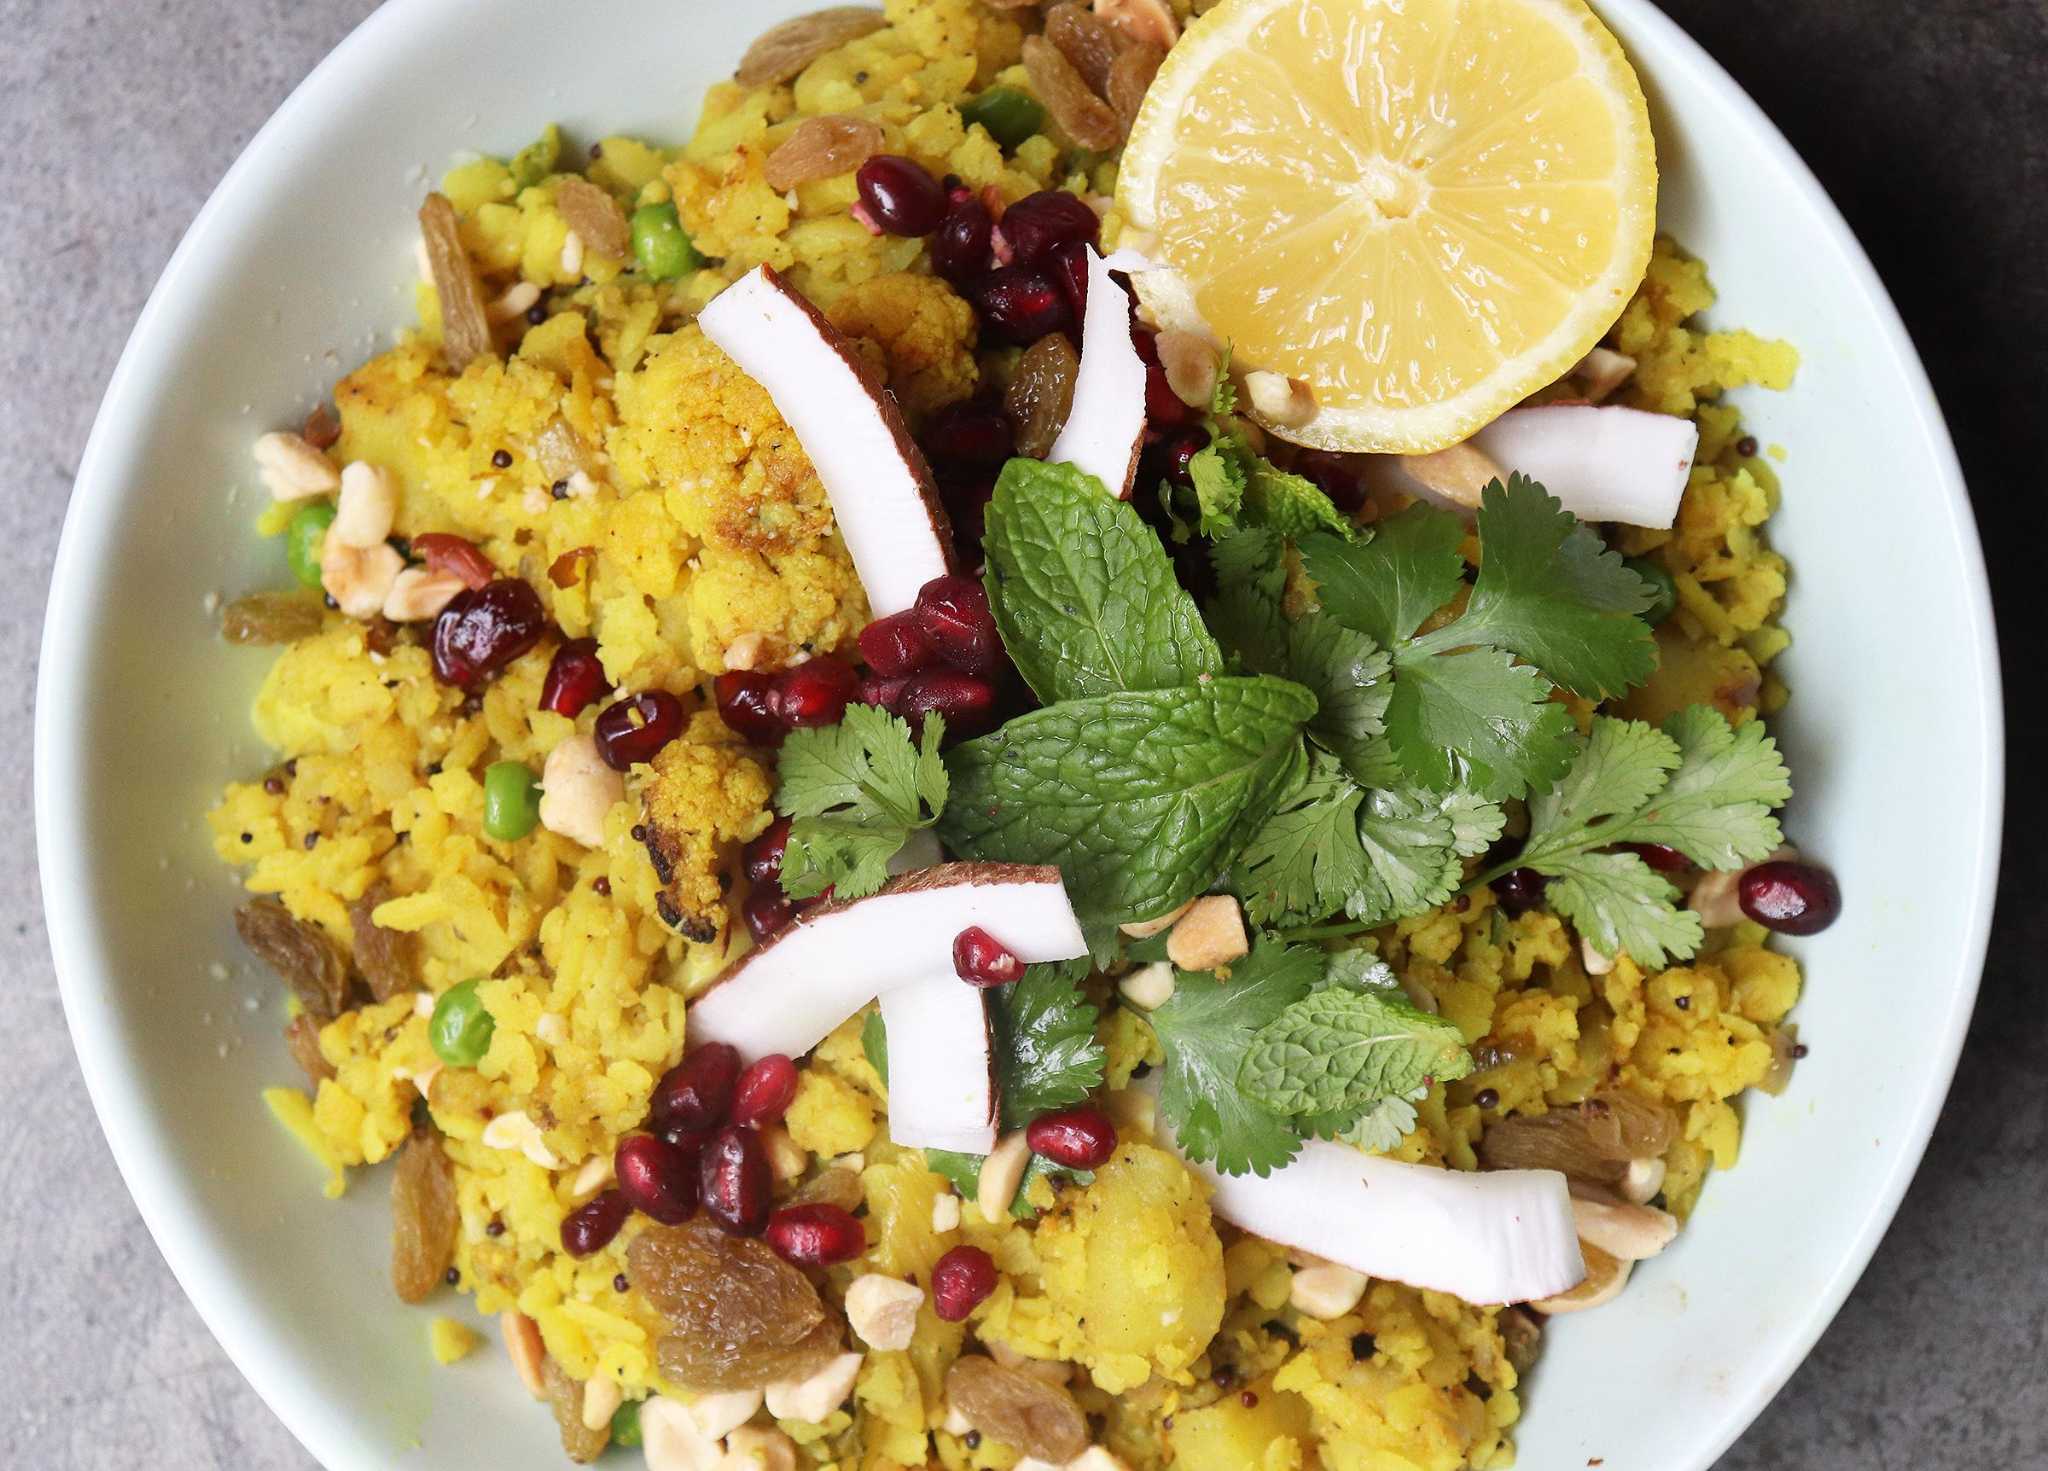 Try a bowl of steaming, fragrant poha with leftover vegetables